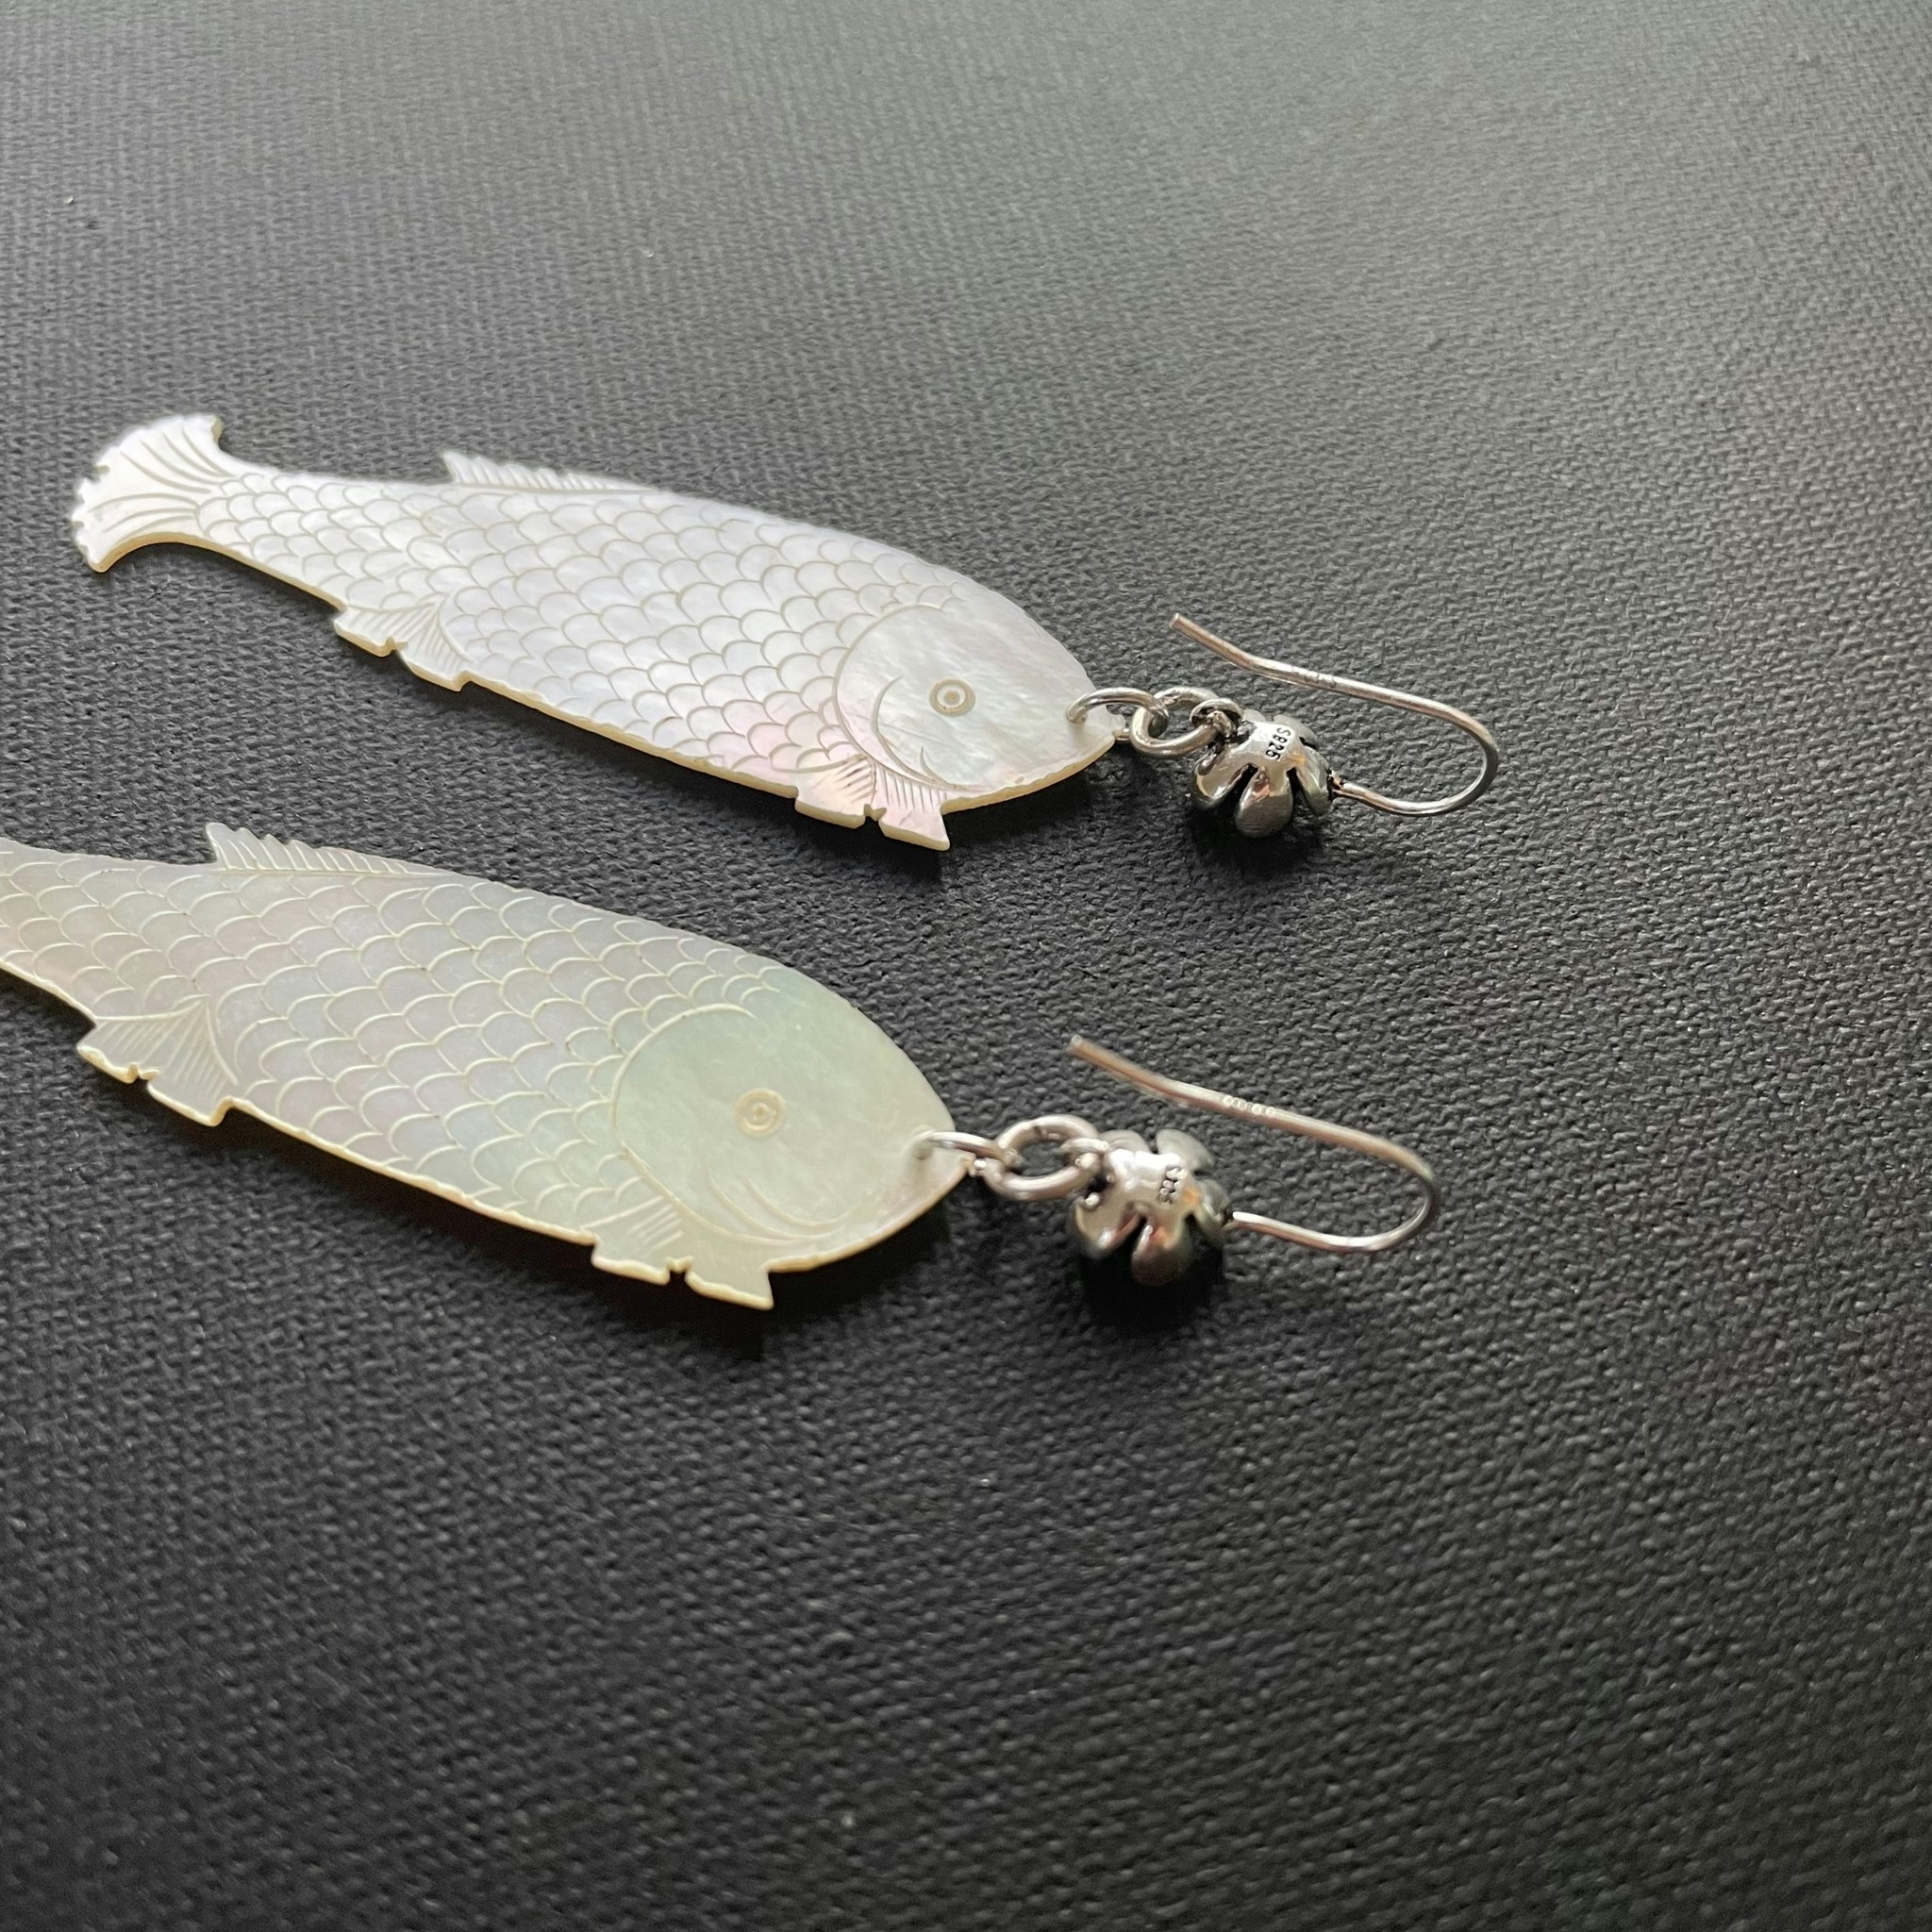 Unique design earrings with antique Chinese mother of pearl gaming counters chips tokens #1661